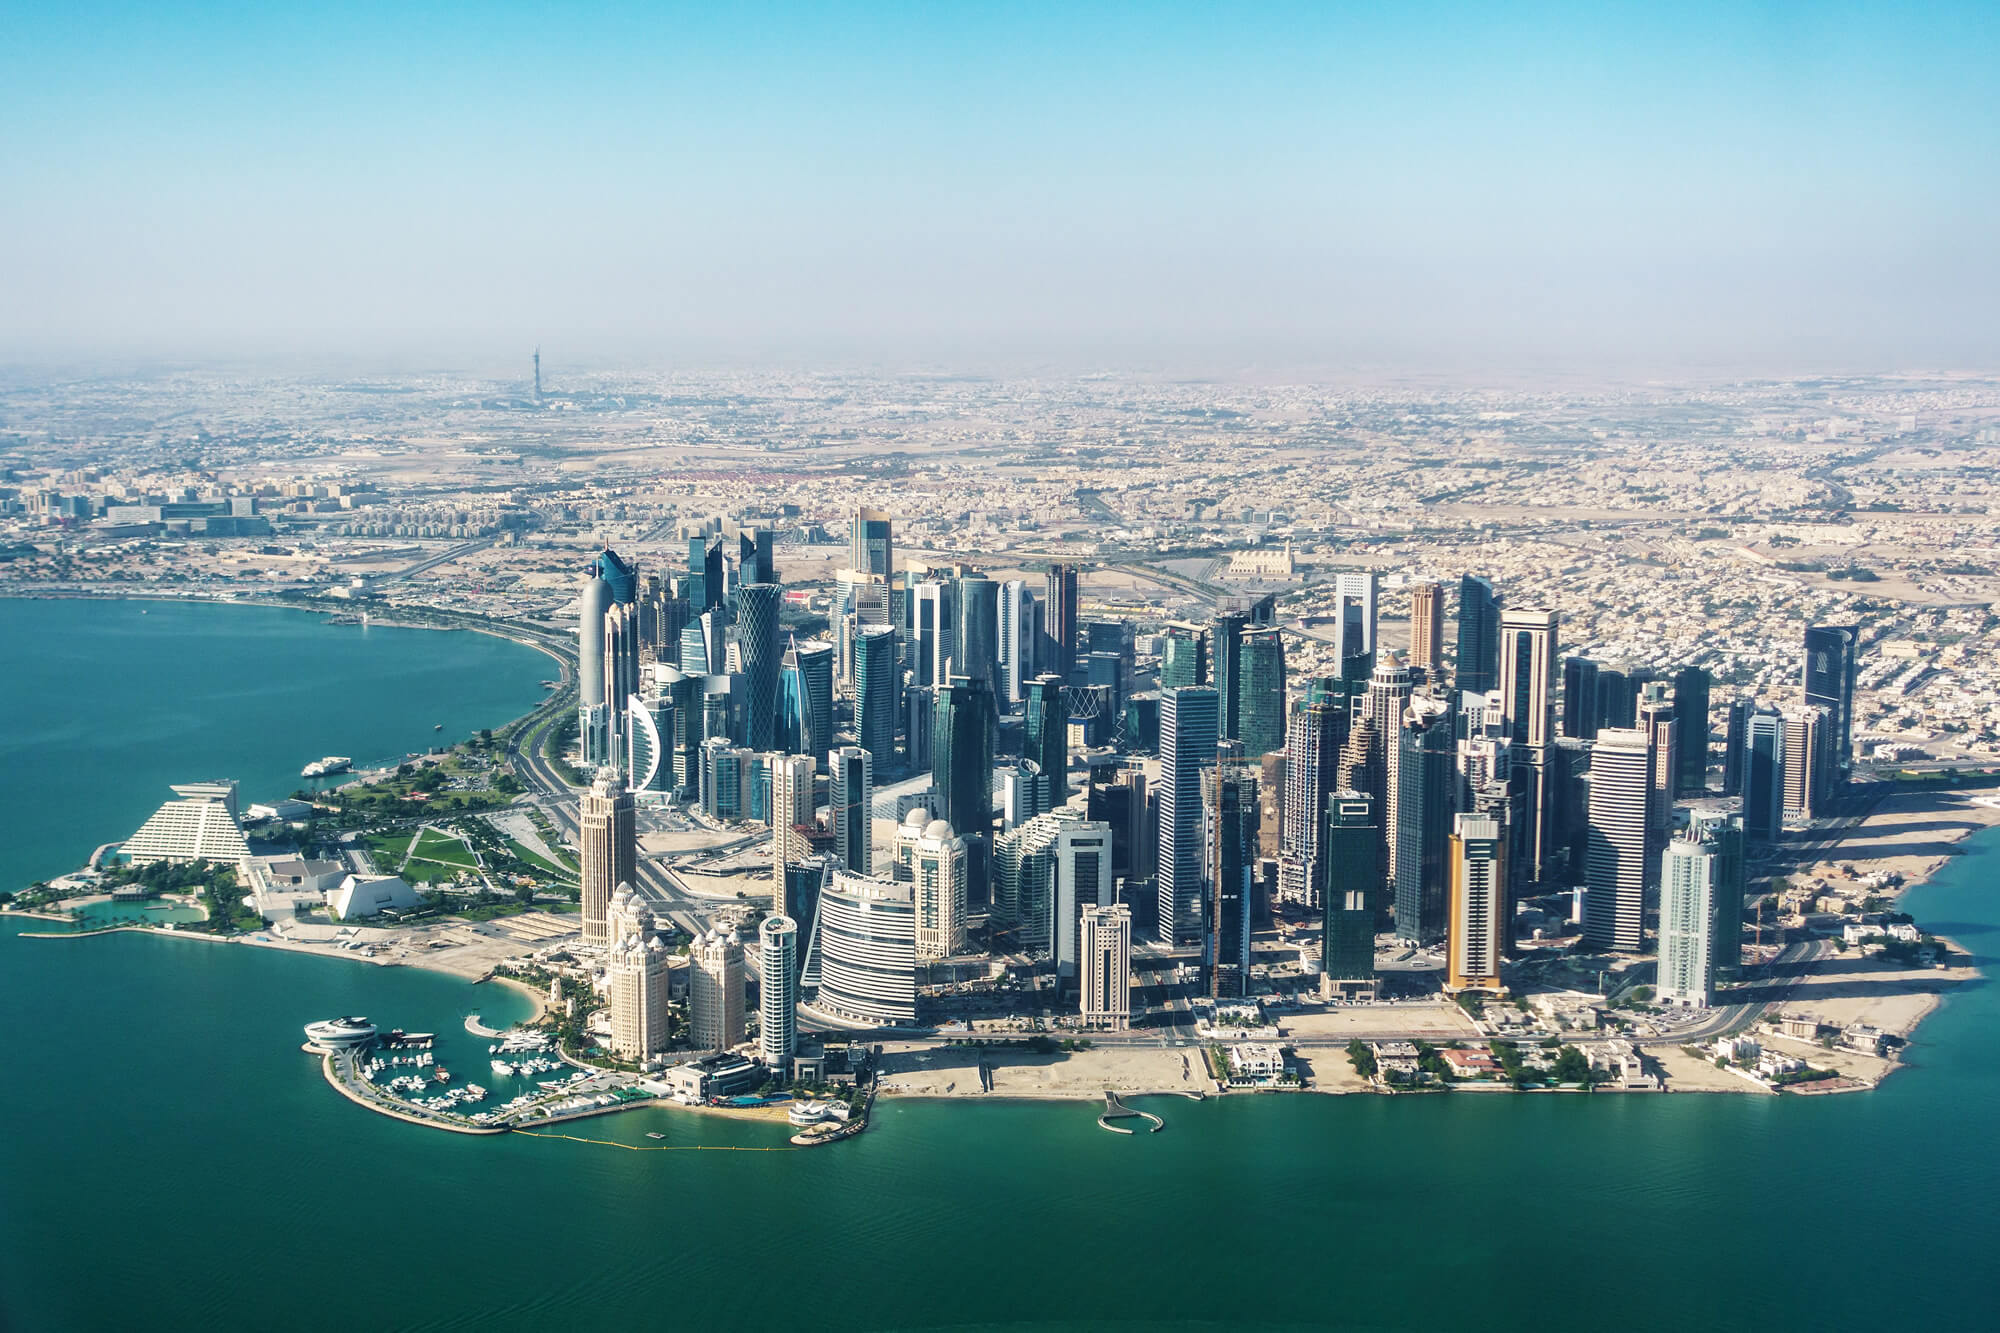 Aerial view of Doha